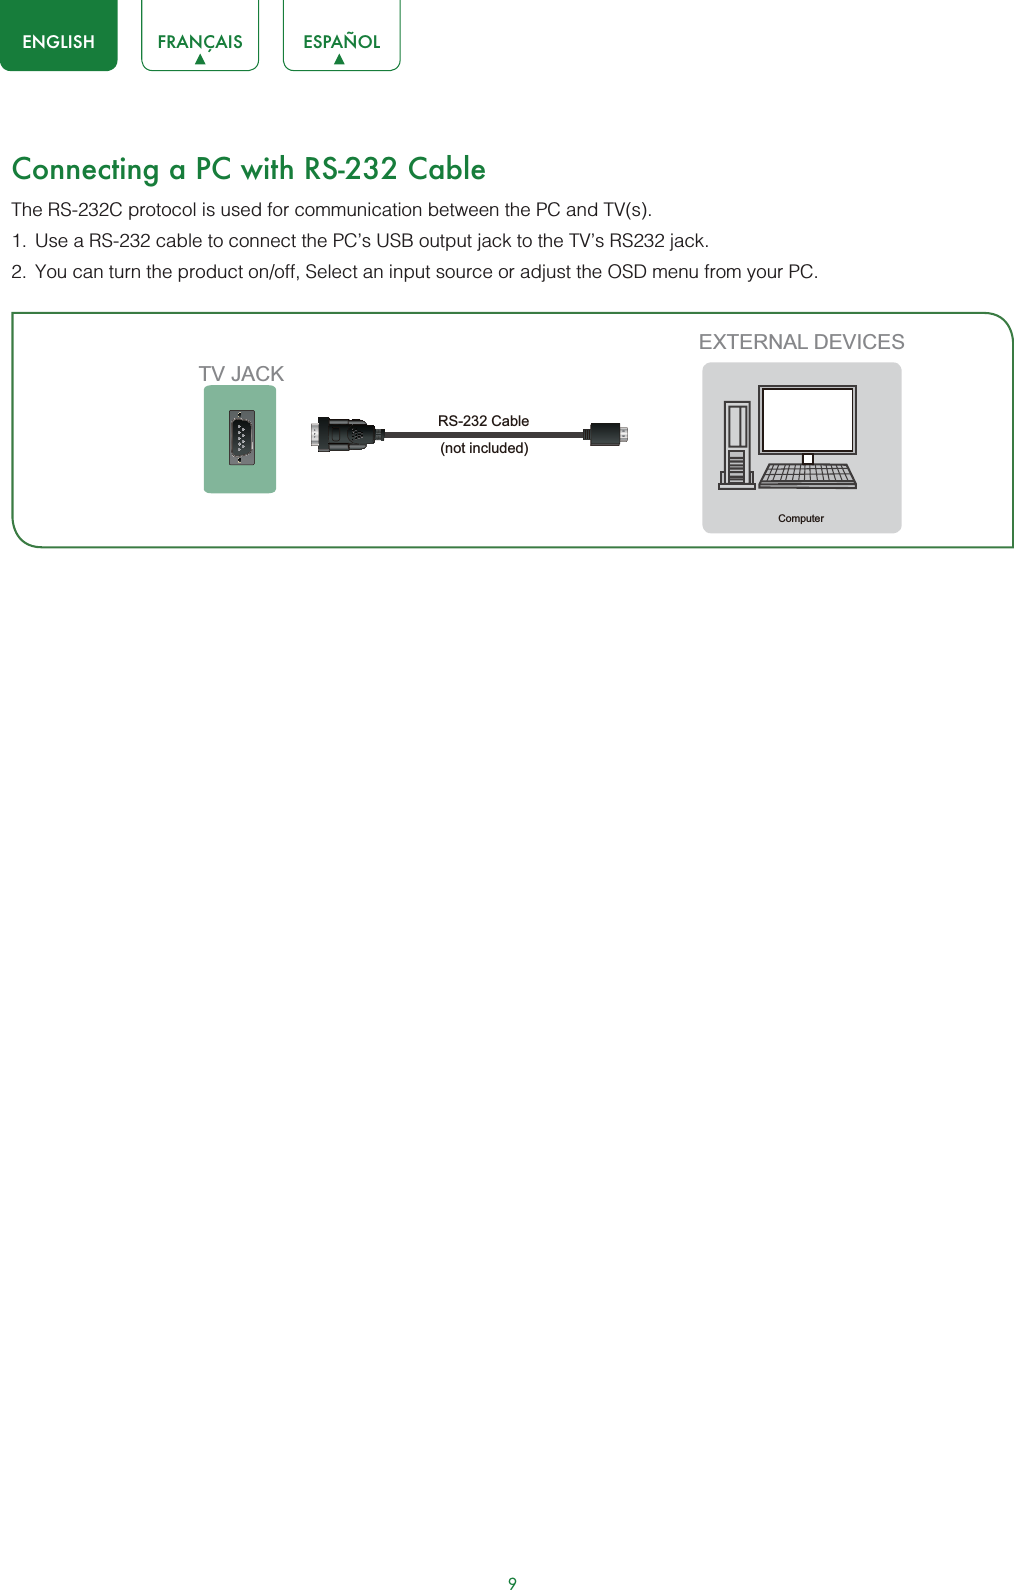 ENGLISH FRANÇAIS ESPAÑOL9Connecting a PC with RS-232 CableThe RS-232C protocol is used for communication between the PC and TV(s). 1. Use a RS-232 cable to connect the PC’s USB output jack to the TV’s RS232 jack.2. You can turn the product on/off, Select an input source or adjust the OSD menu from your PC.EXTERNAL DEVICESComputerTV JACKRS-232 Cable(not included)